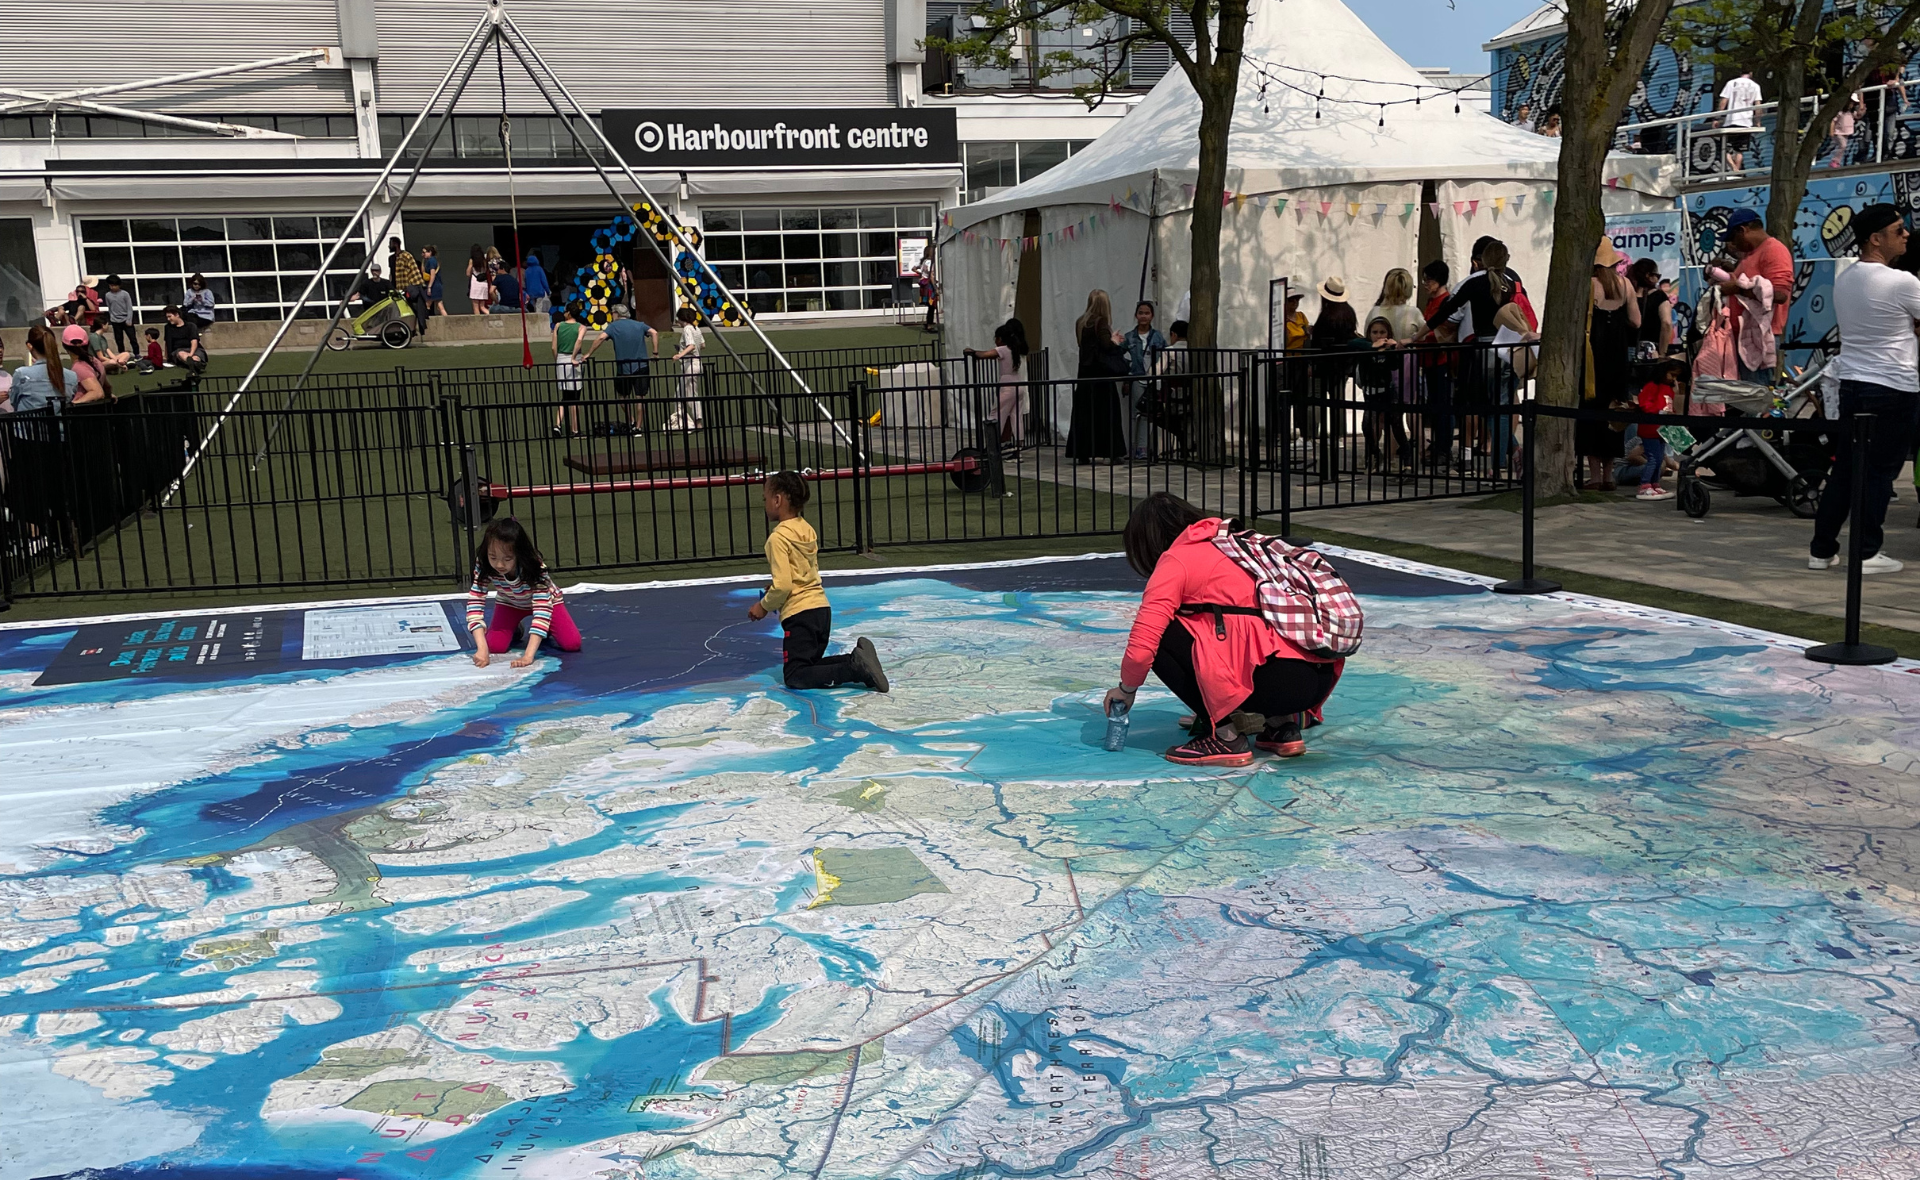 An adult and two children are crouched observing the giant-floor map of Canada. In the background is Toronto's Harbourfront Centre and other JUNIOR festival booths and activities.